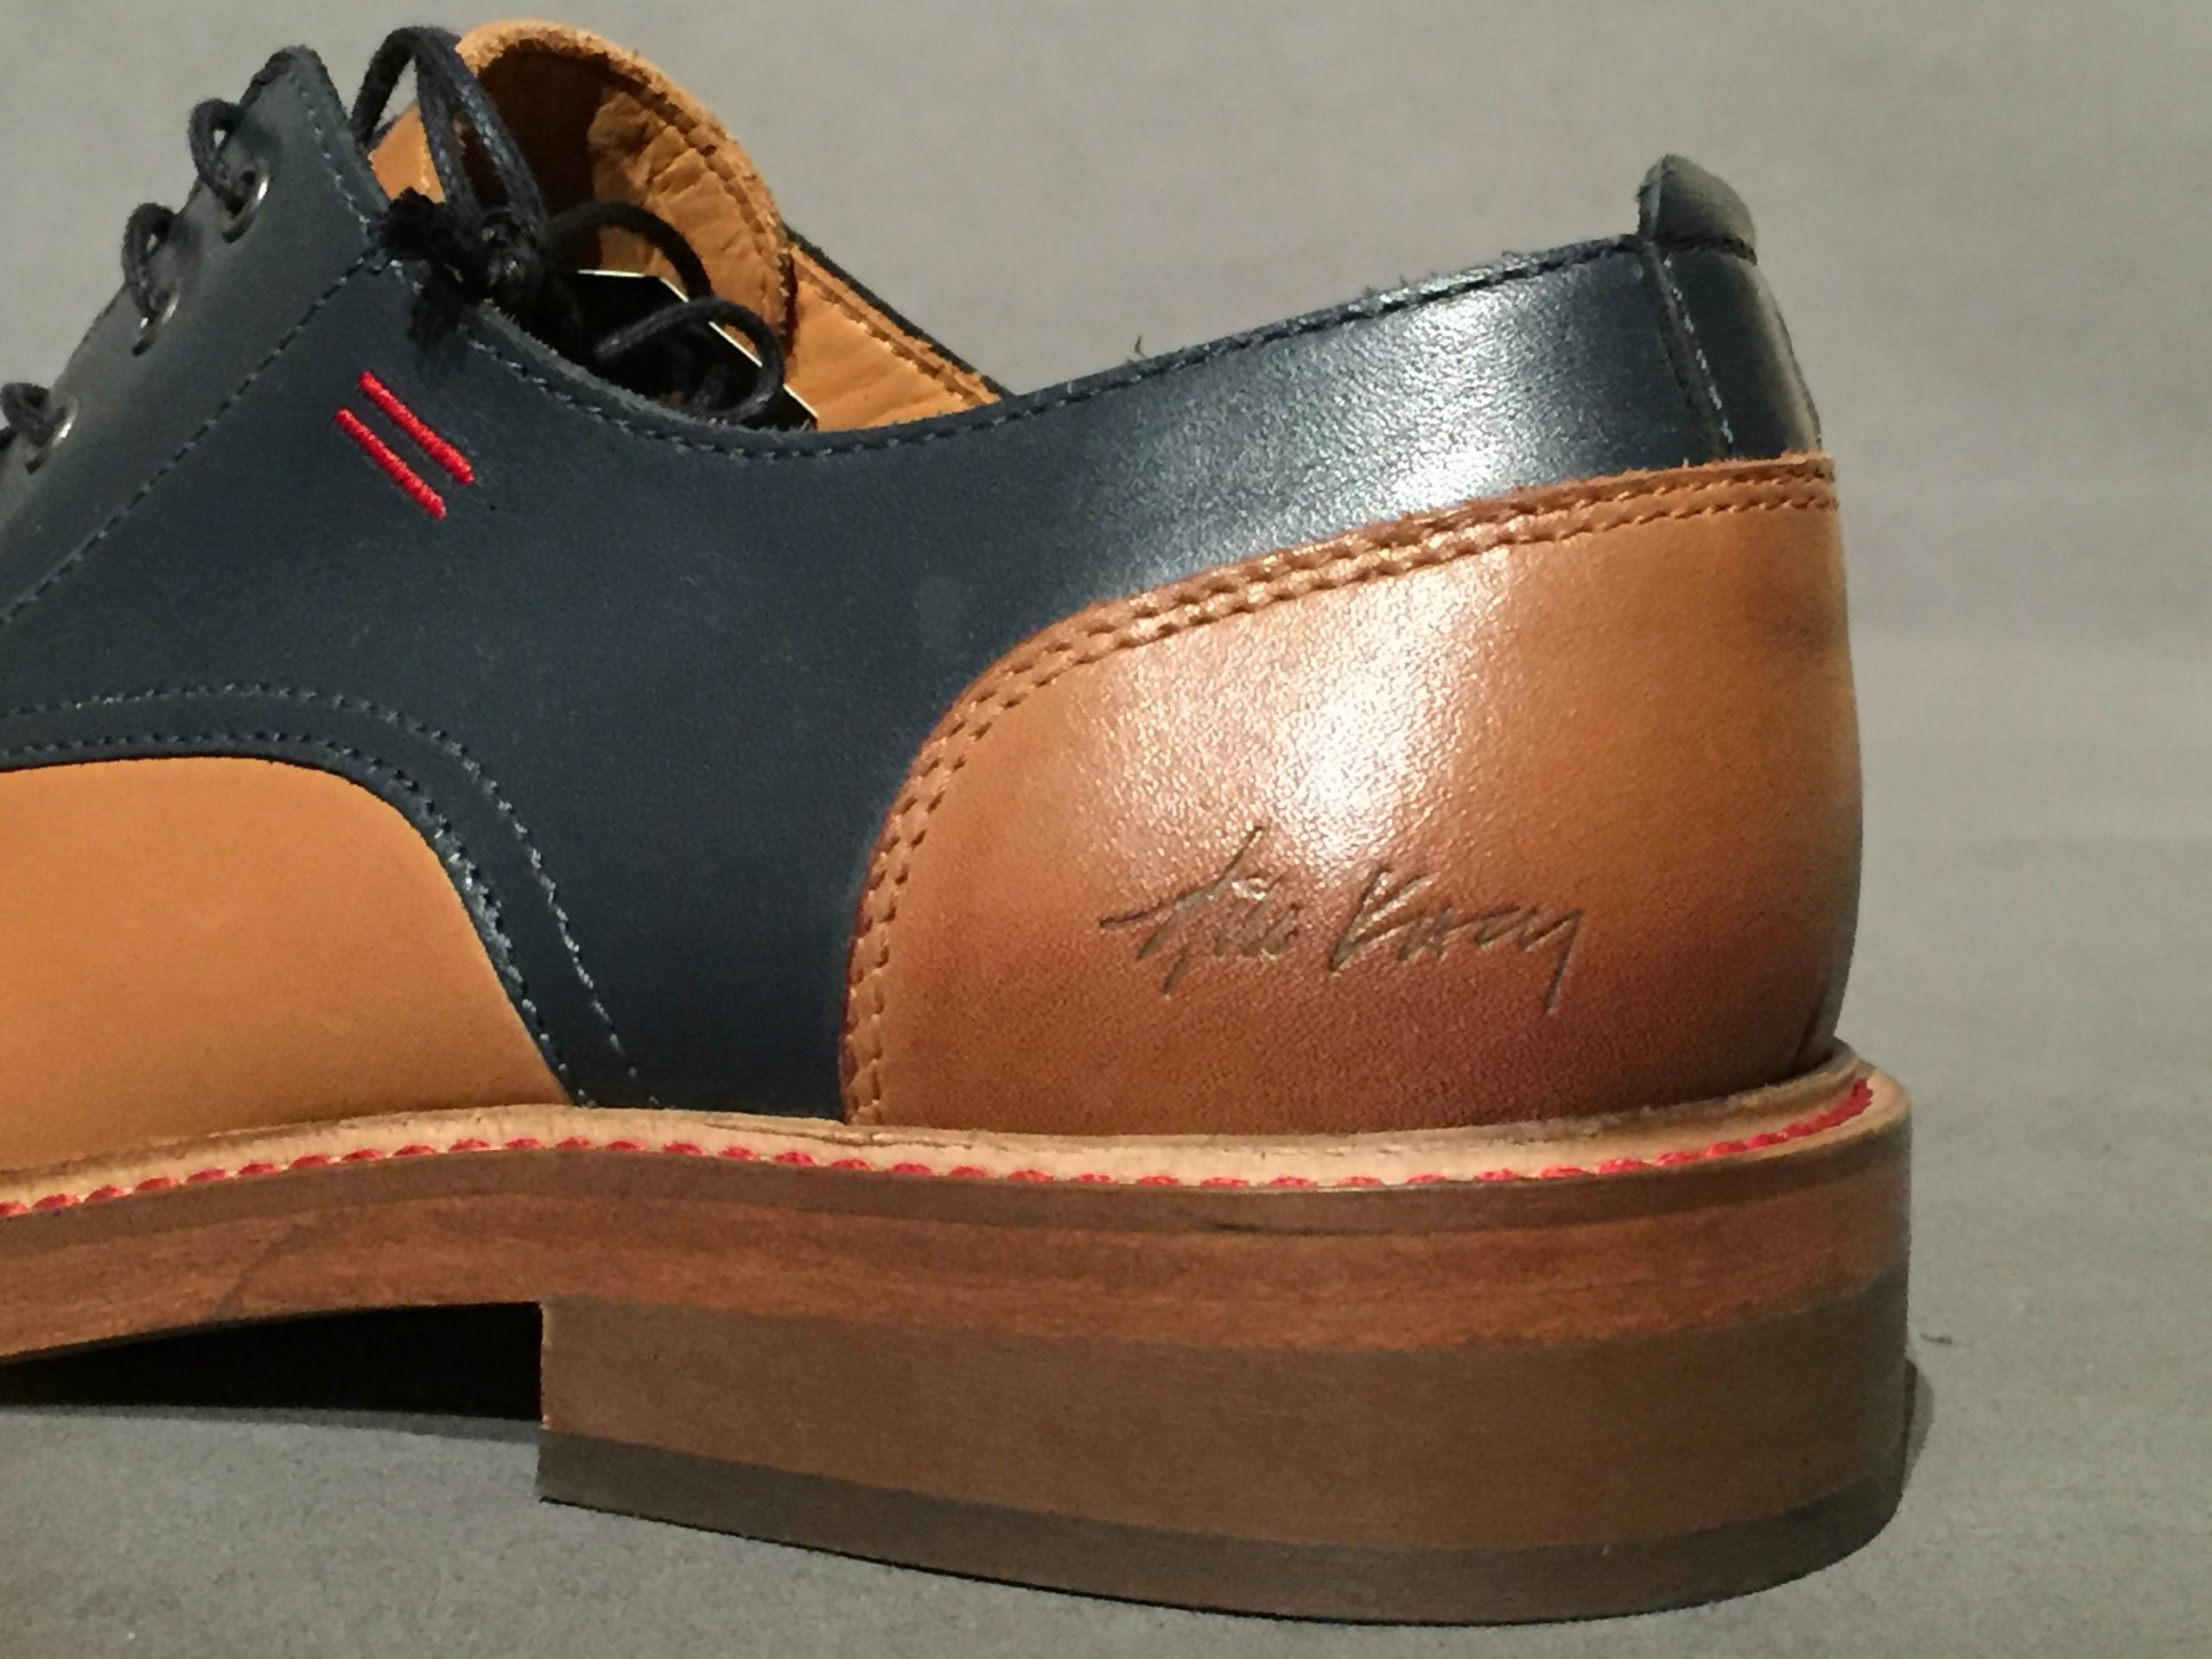 Close-up of Nik Kacy imprint on side of two-tone brown and navy oxford shoes